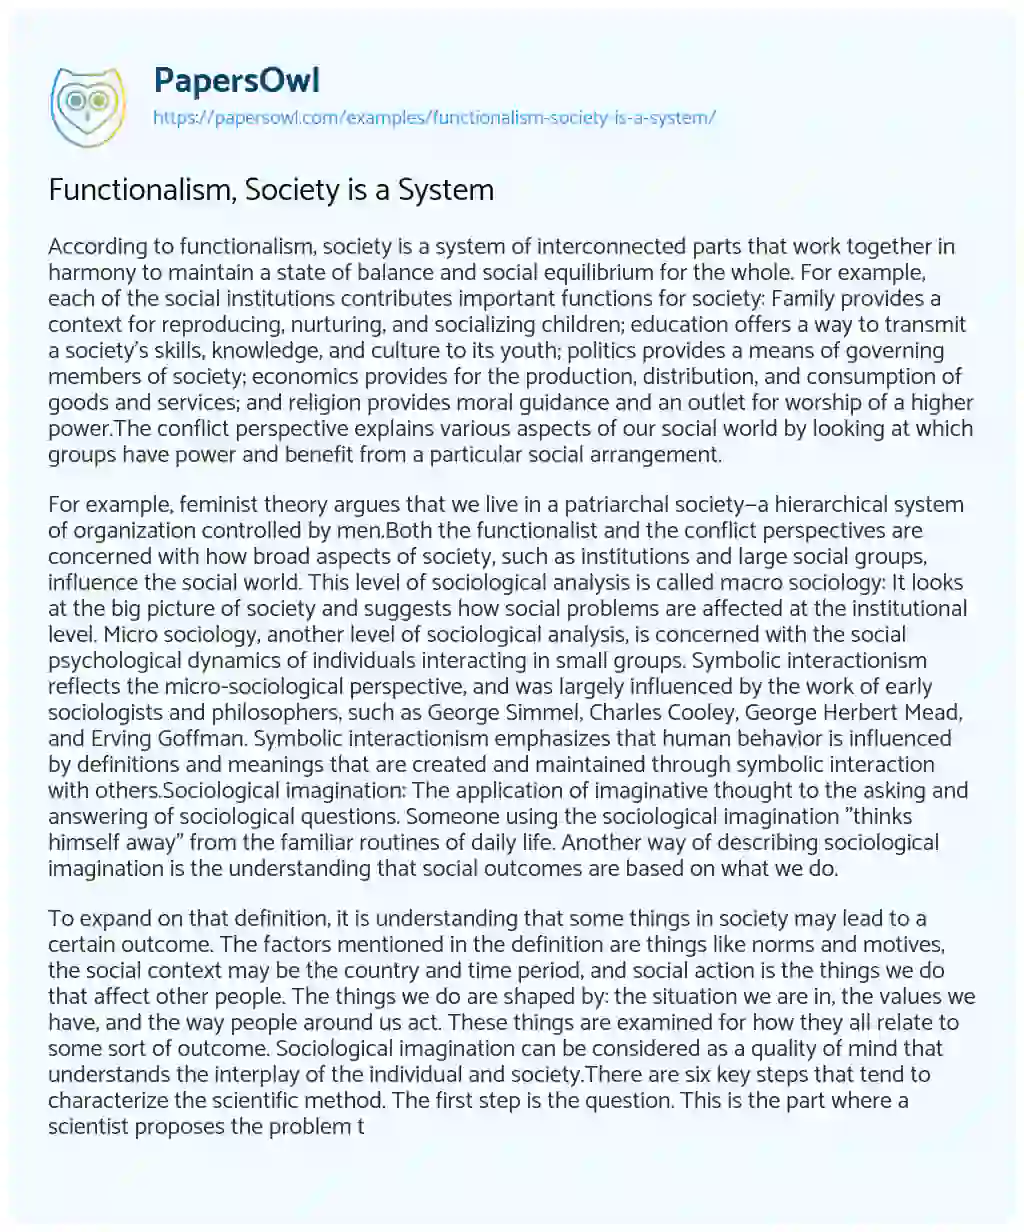 Functionalism, Society is a System essay